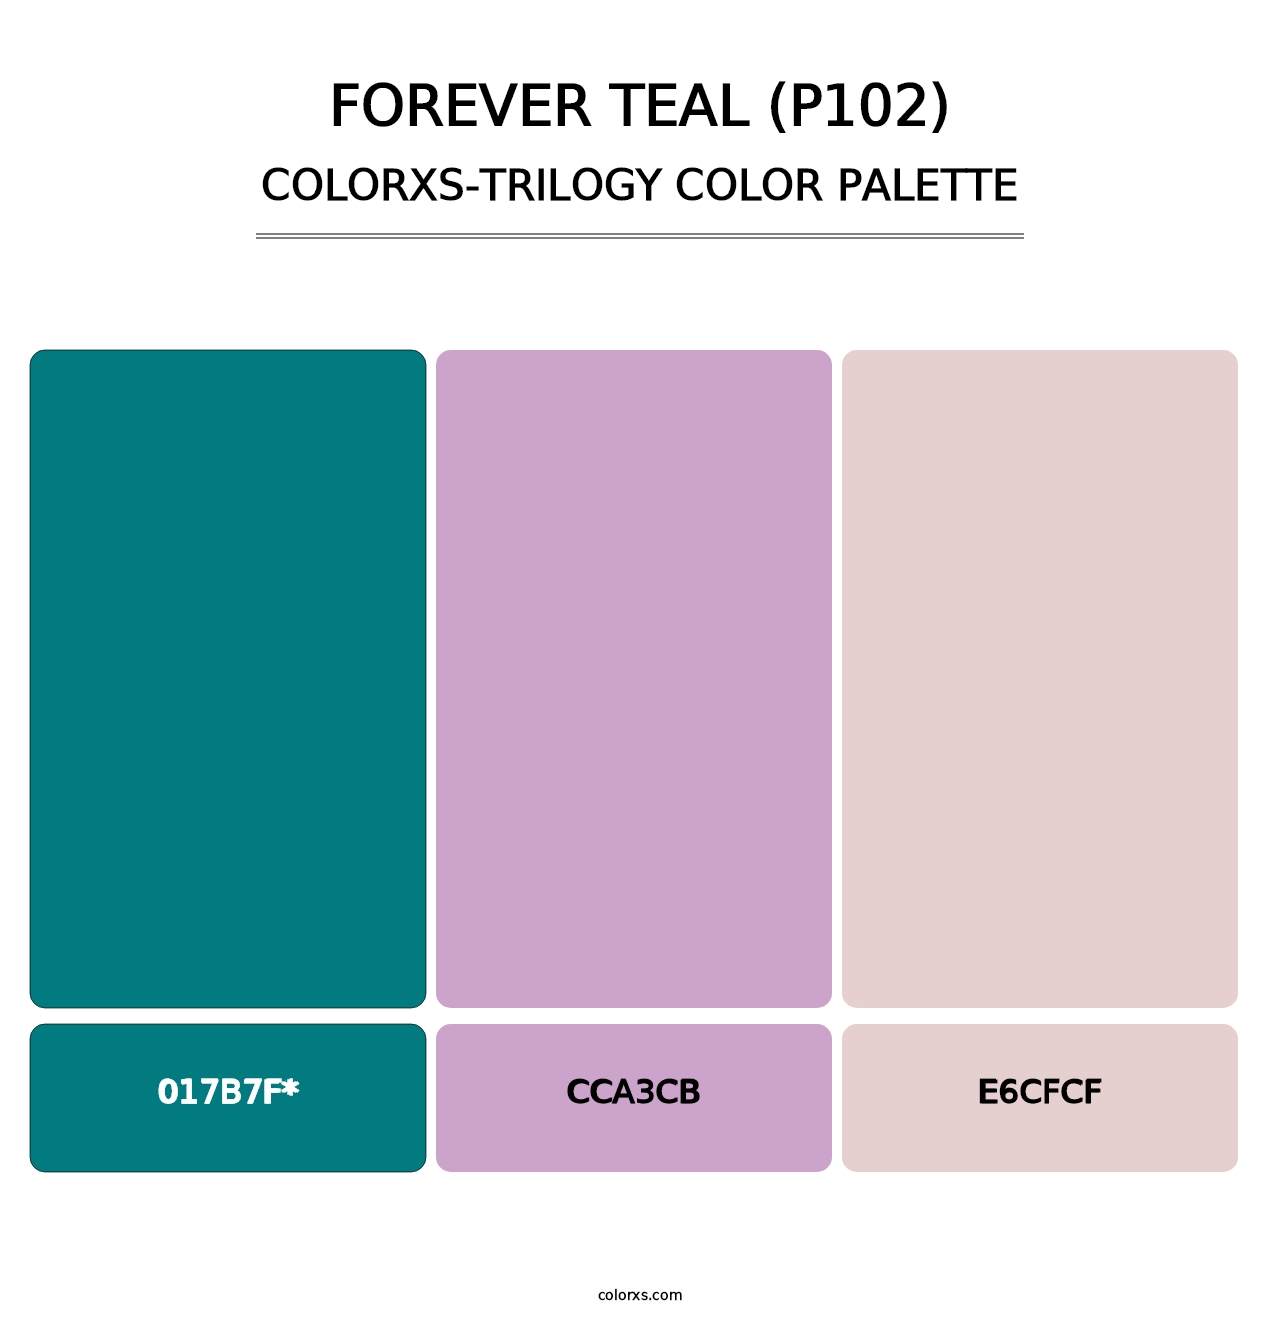 Forever Teal (P102) - Colorxs Trilogy Palette